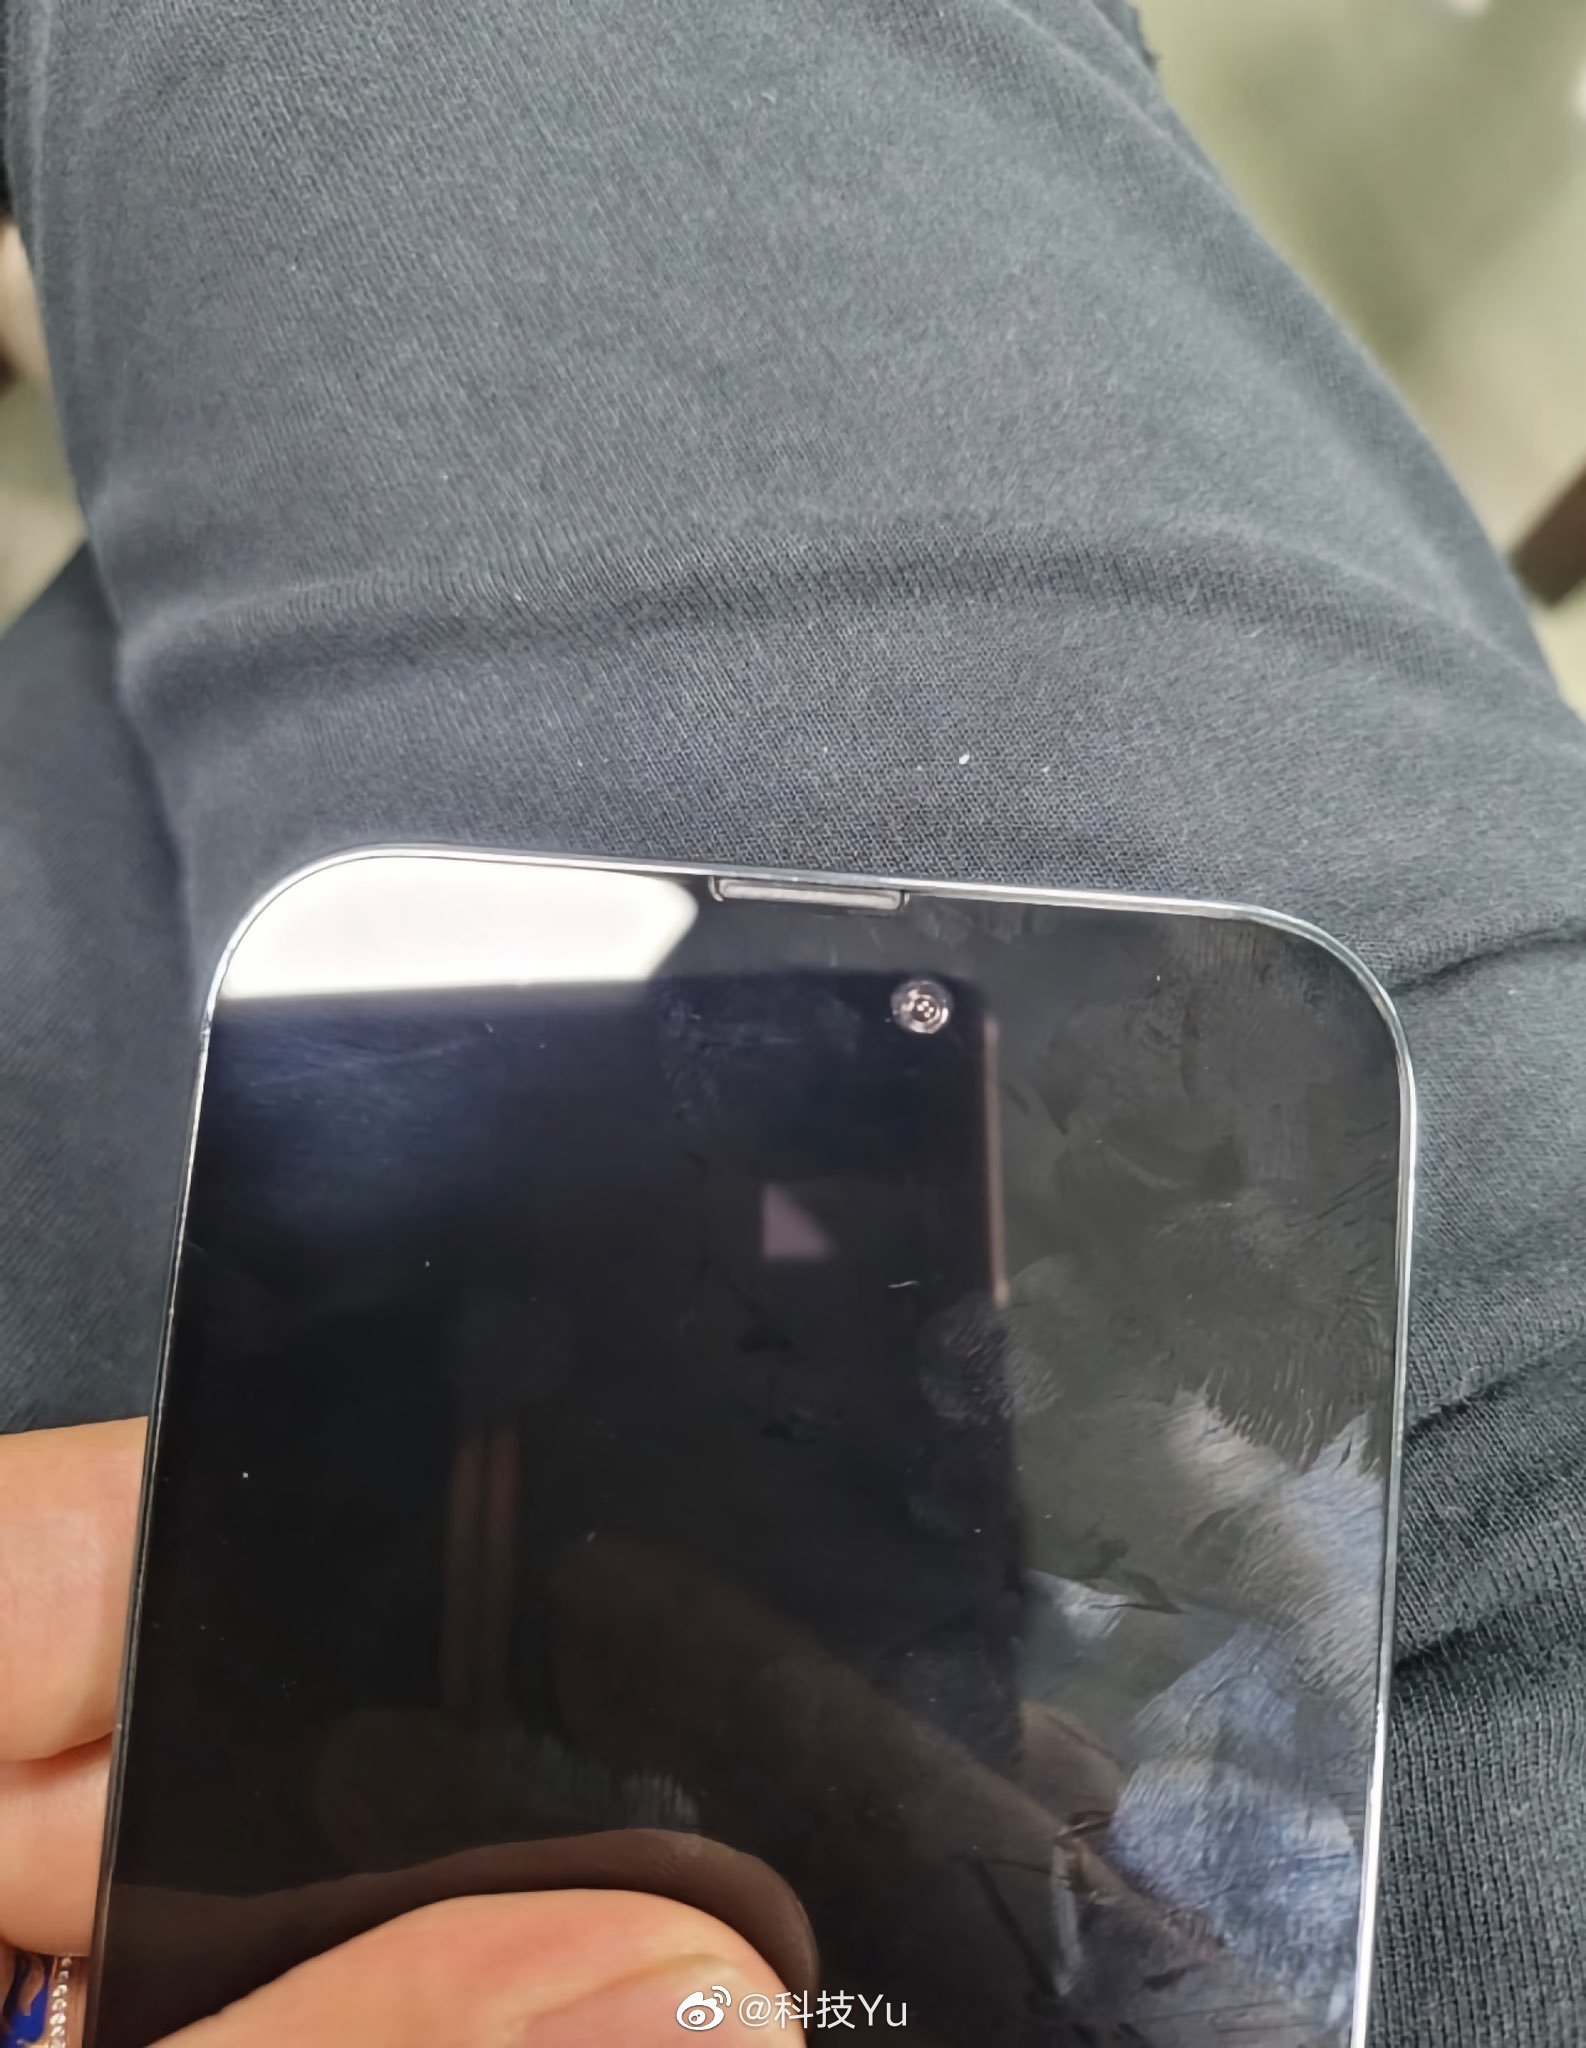 An alleged real-life image of the iPhone 14 Pro's new notch design